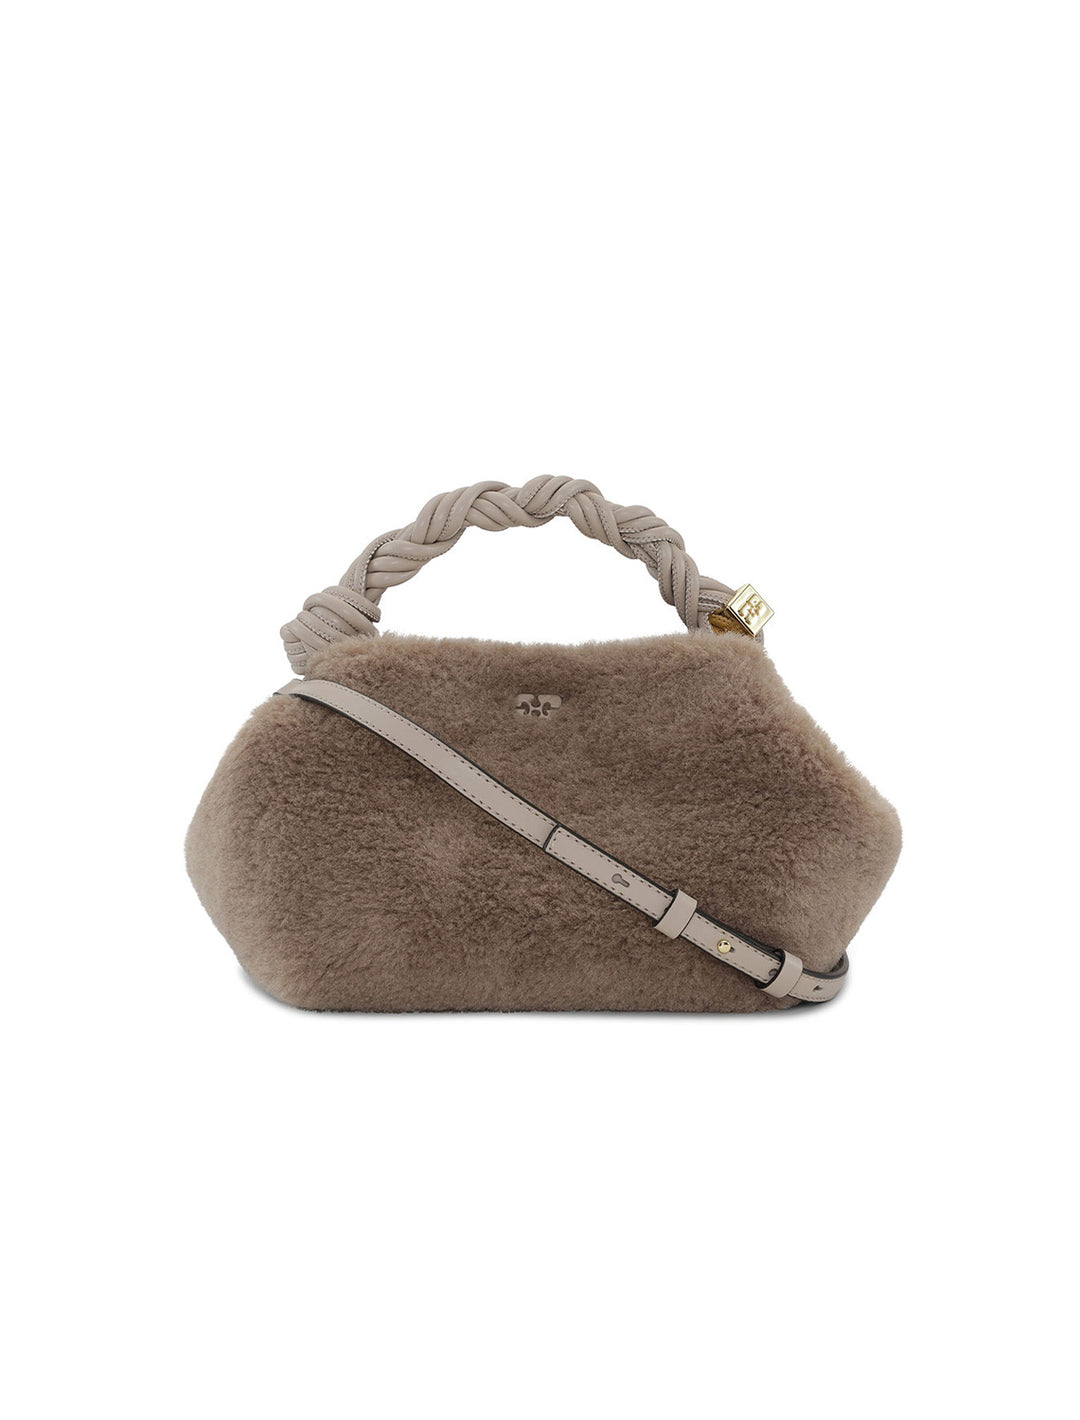 Front view of GANNI's small bou bag in oyster gray fur.